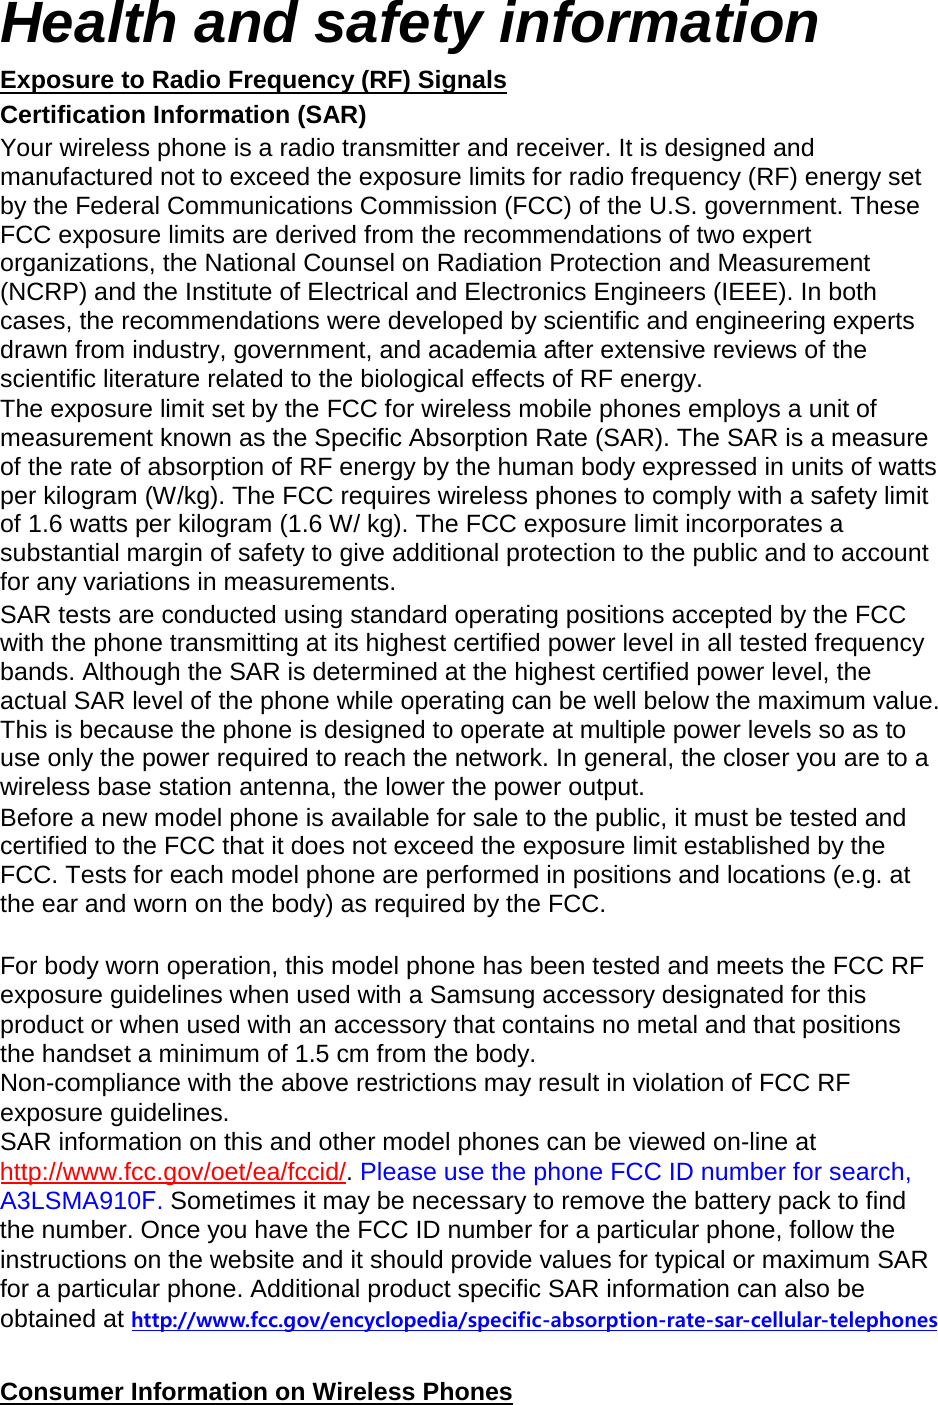 Health and safety information Exposure to Radio Frequency (RF) Signals Certification Information (SAR) Your wireless phone is a radio transmitter and receiver. It is designed and manufactured not to exceed the exposure limits for radio frequency (RF) energy set by the Federal Communications Commission (FCC) of the U.S. government. These FCC exposure limits are derived from the recommendations of two expert organizations, the National Counsel on Radiation Protection and Measurement (NCRP) and the Institute of Electrical and Electronics Engineers (IEEE). In both cases, the recommendations were developed by scientific and engineering experts drawn from industry, government, and academia after extensive reviews of the scientific literature related to the biological effects of RF energy. The exposure limit set by the FCC for wireless mobile phones employs a unit of measurement known as the Specific Absorption Rate (SAR). The SAR is a measure of the rate of absorption of RF energy by the human body expressed in units of watts per kilogram (W/kg). The FCC requires wireless phones to comply with a safety limit of 1.6 watts per kilogram (1.6 W/ kg). The FCC exposure limit incorporates a substantial margin of safety to give additional protection to the public and to account for any variations in measurements. SAR tests are conducted using standard operating positions accepted by the FCC with the phone transmitting at its highest certified power level in all tested frequency bands. Although the SAR is determined at the highest certified power level, the actual SAR level of the phone while operating can be well below the maximum value. This is because the phone is designed to operate at multiple power levels so as to use only the power required to reach the network. In general, the closer you are to a wireless base station antenna, the lower the power output. Before a new model phone is available for sale to the public, it must be tested and certified to the FCC that it does not exceed the exposure limit established by the FCC. Tests for each model phone are performed in positions and locations (e.g. at the ear and worn on the body) as required by the FCC.     For body worn operation, this model phone has been tested and meets the FCC RF exposure guidelines when used with a Samsung accessory designated for this product or when used with an accessory that contains no metal and that positions the handset a minimum of 1.5 cm from the body.  Non-compliance with the above restrictions may result in violation of FCC RF exposure guidelines. SAR information on this and other model phones can be viewed on-line at http://www.fcc.gov/oet/ea/fccid/. Please use the phone FCC ID number for search, A3LSMA910F. Sometimes it may be necessary to remove the battery pack to find the number. Once you have the FCC ID number for a particular phone, follow the instructions on the website and it should provide values for typical or maximum SAR for a particular phone. Additional product specific SAR information can also be obtained at http://www.fcc.gov/encyclopedia/specific-absorption-rate-sar-cellular-telephonesConsumer Information on Wireless Phones 